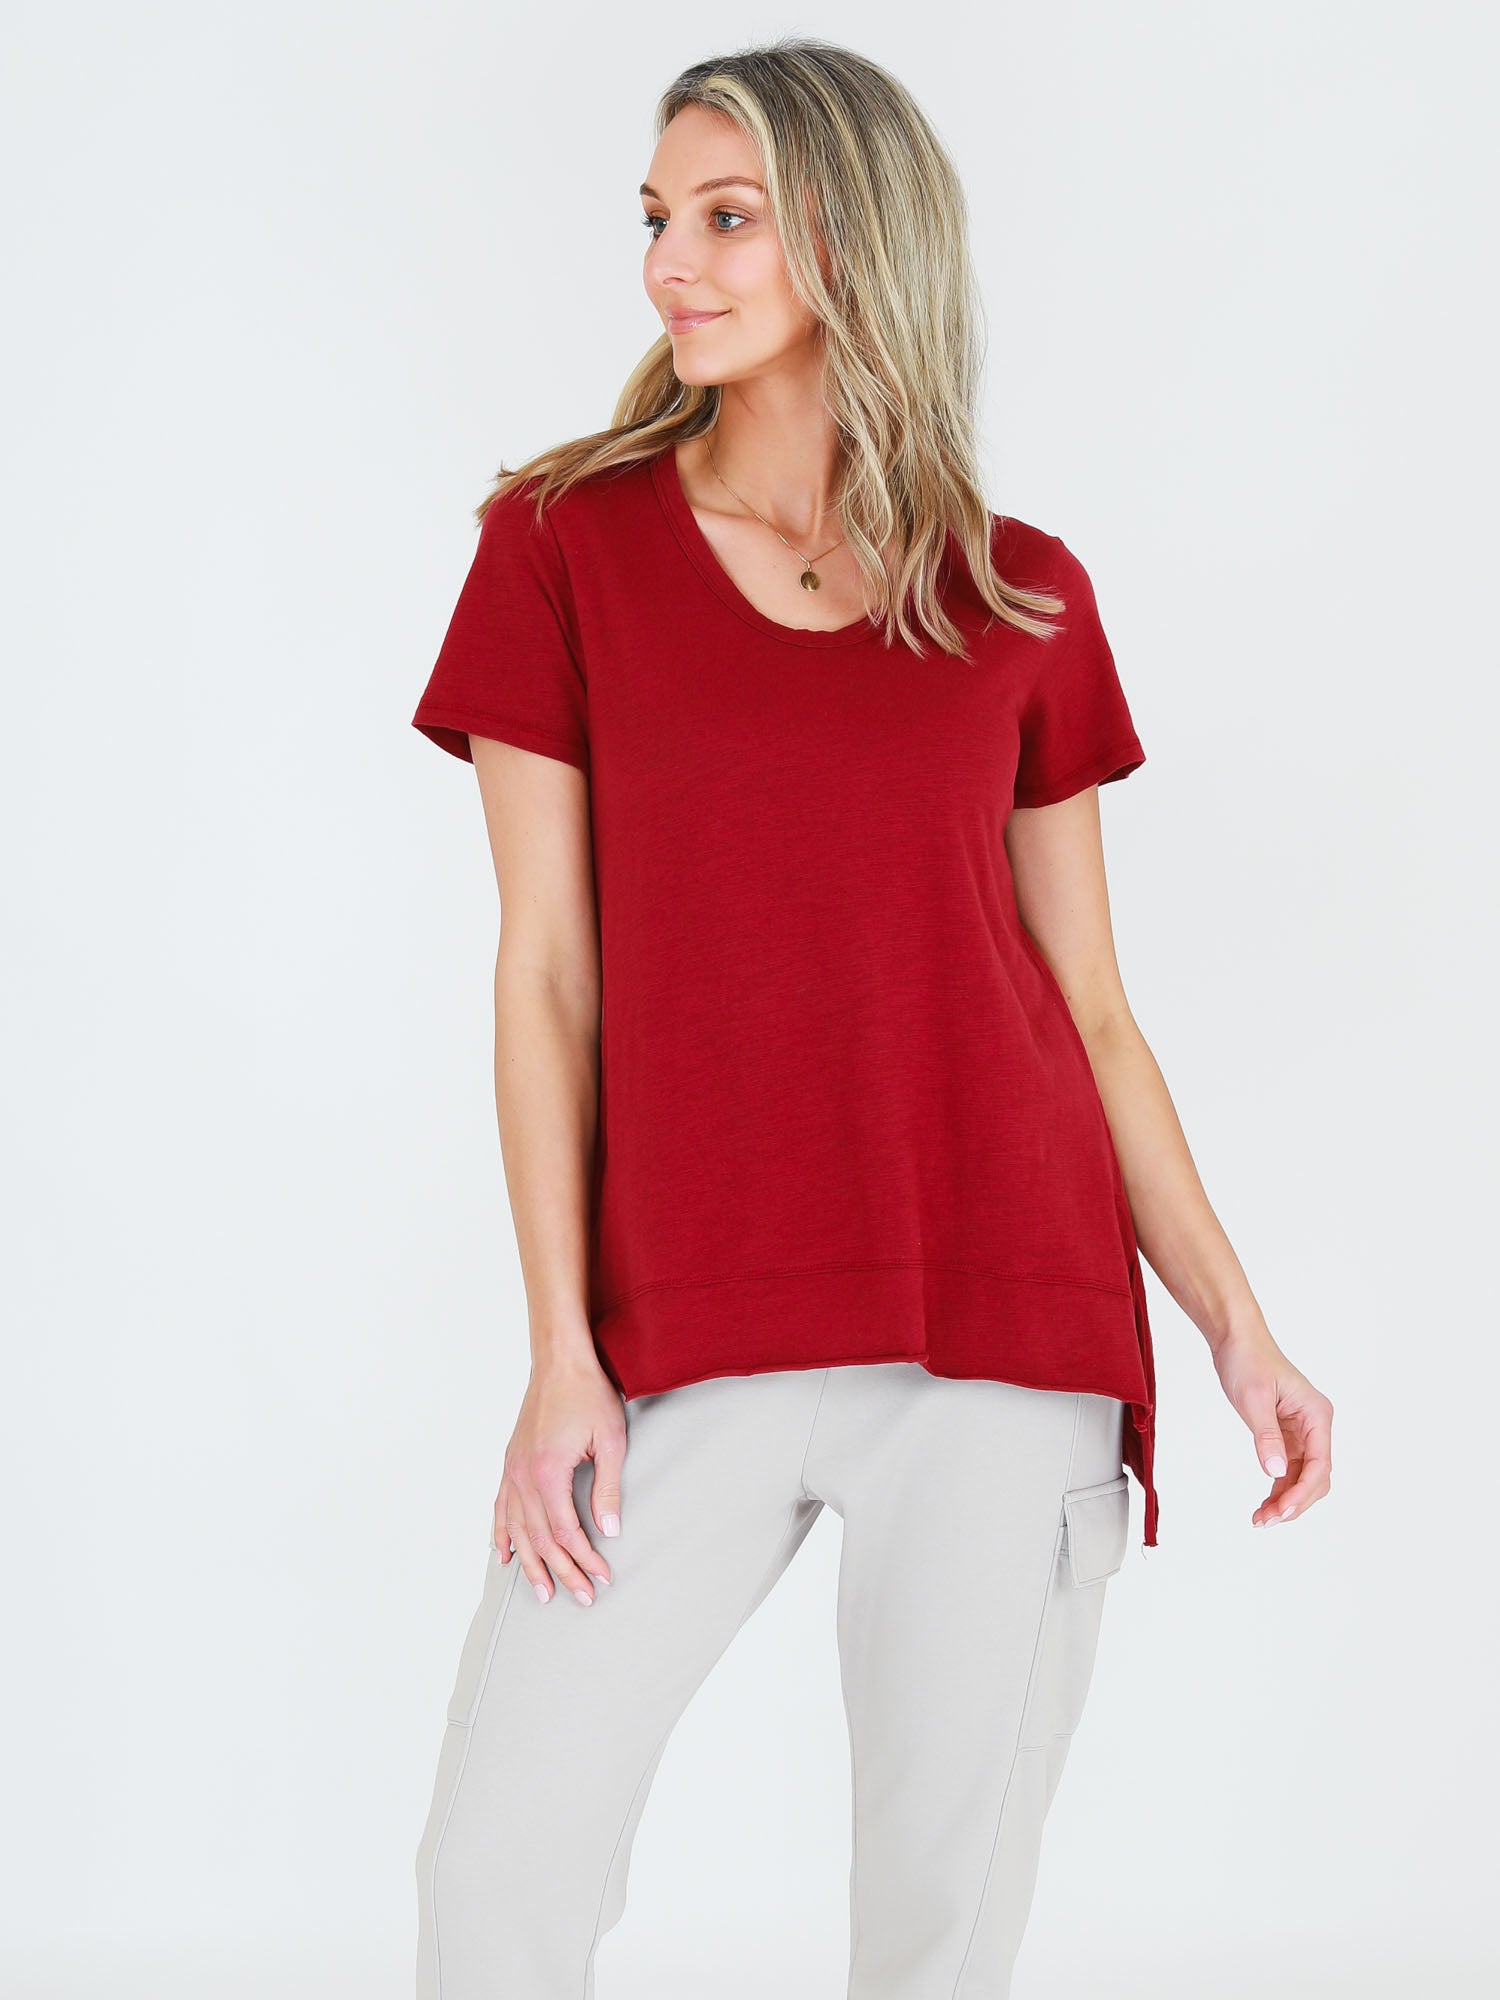 red tshirt womens #color_cranberry